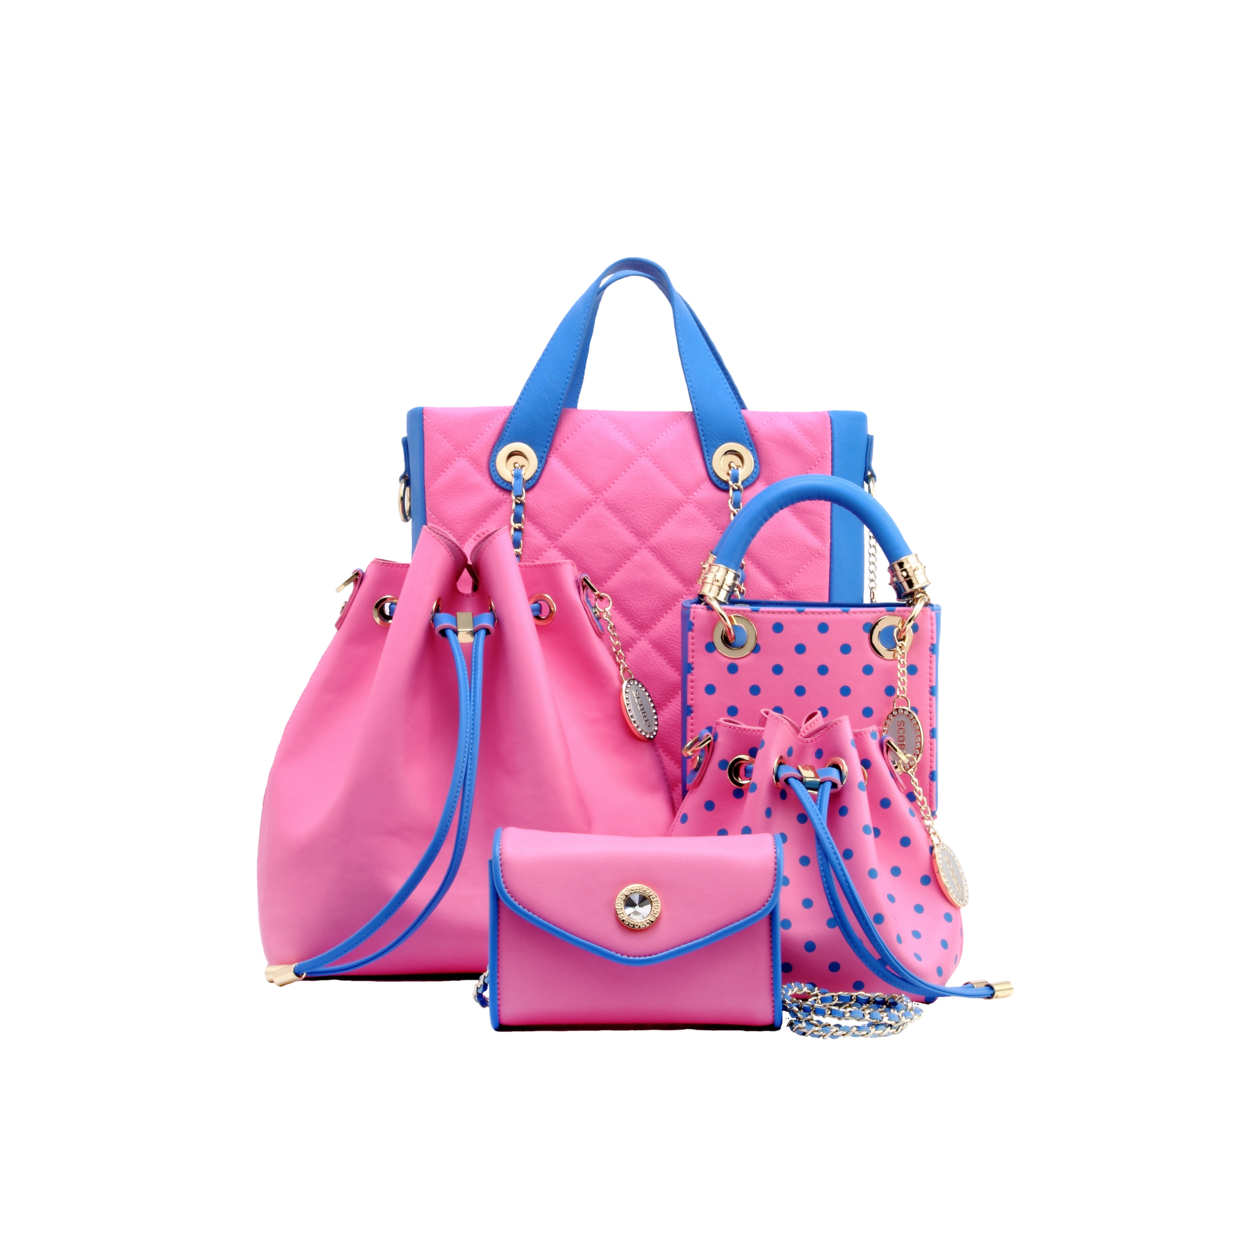 SCORE!'s Kat Travel Tote For Business, Work, Or School Quilted Shoulder Bag - Pink And Blue